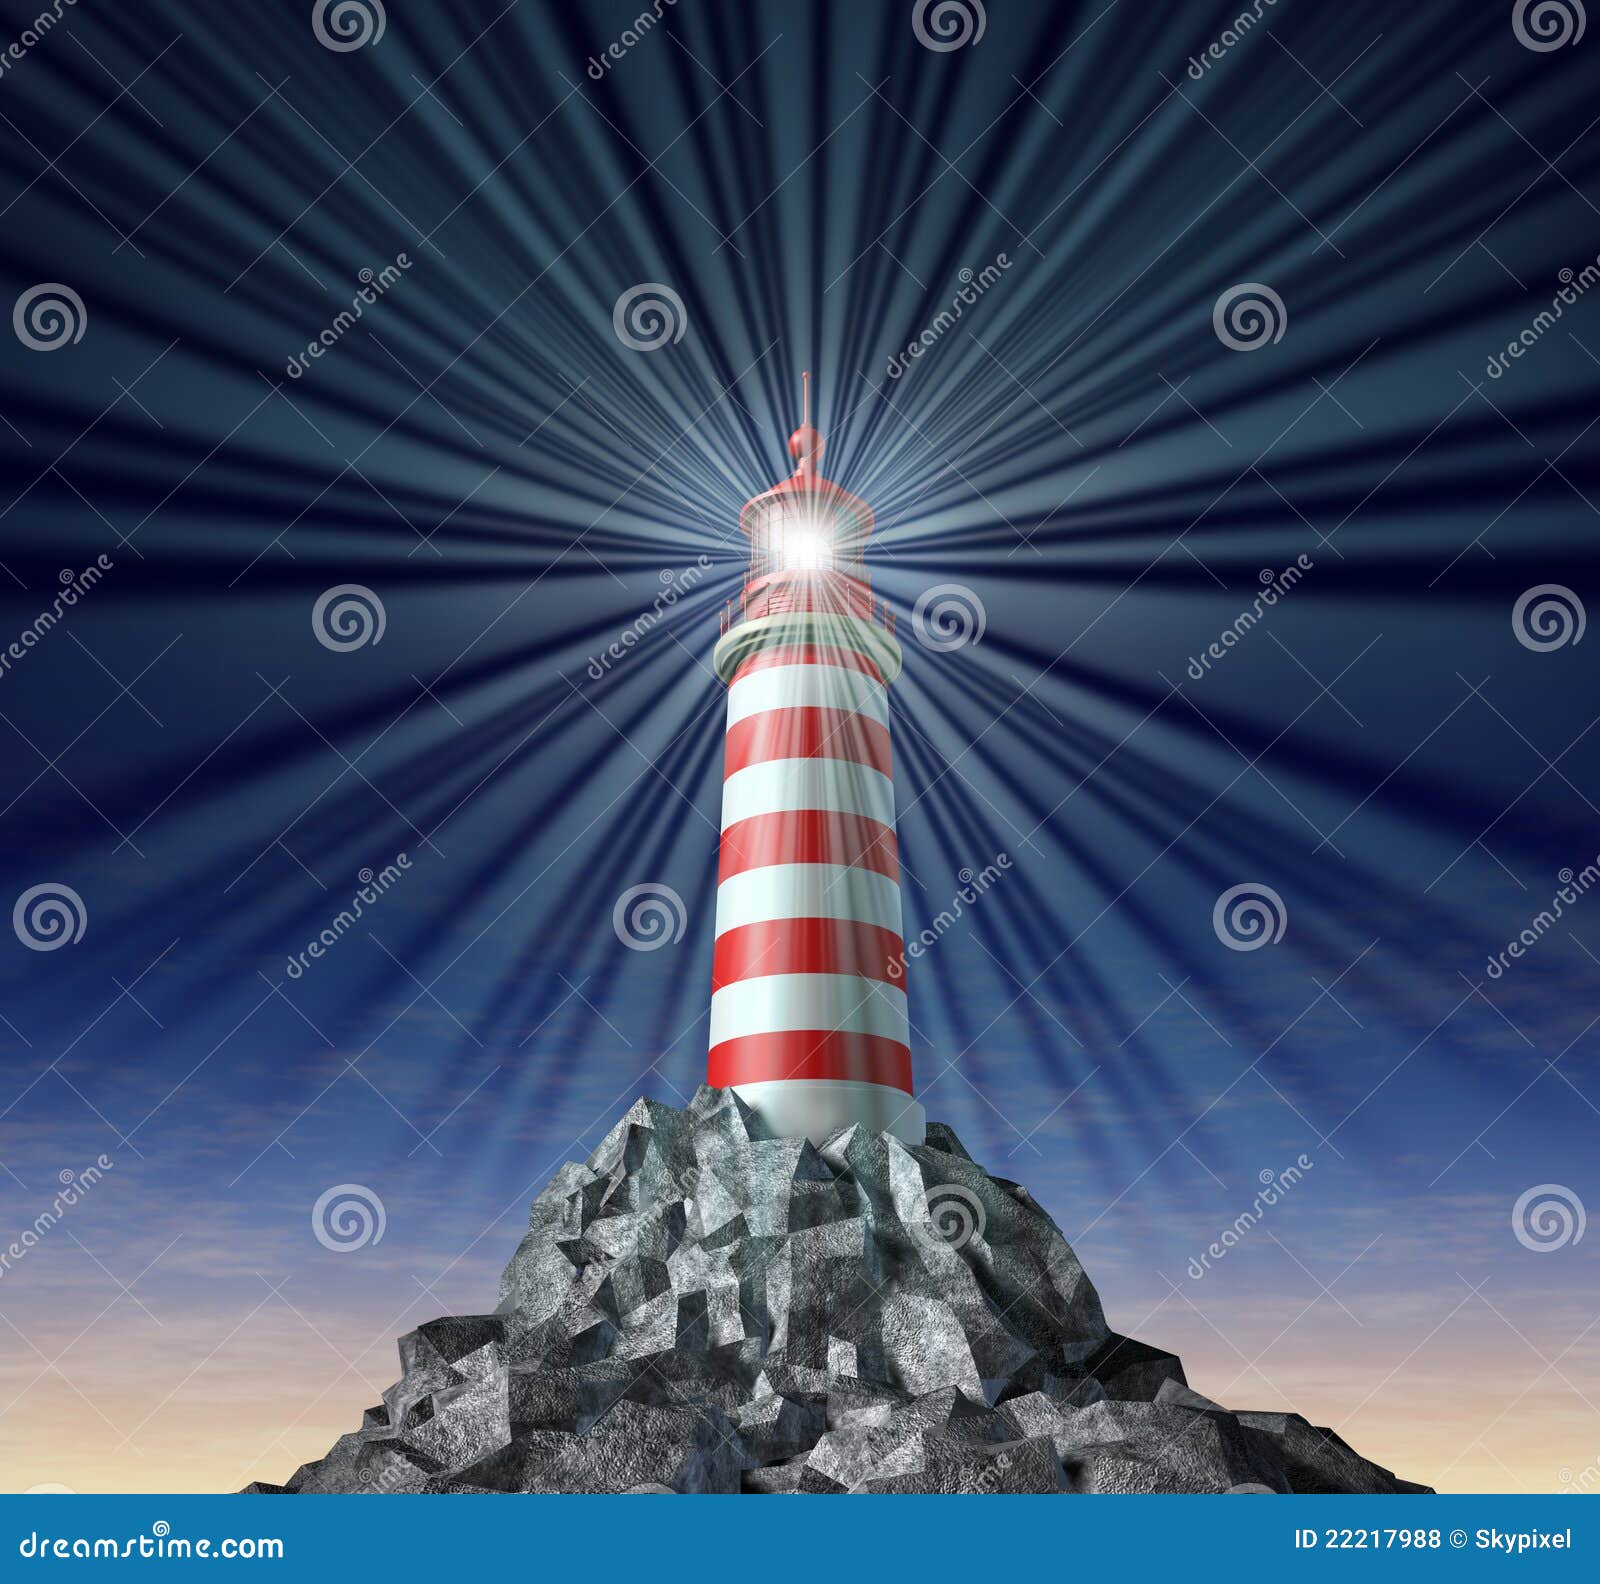 solutions with a beaming lighthouse 